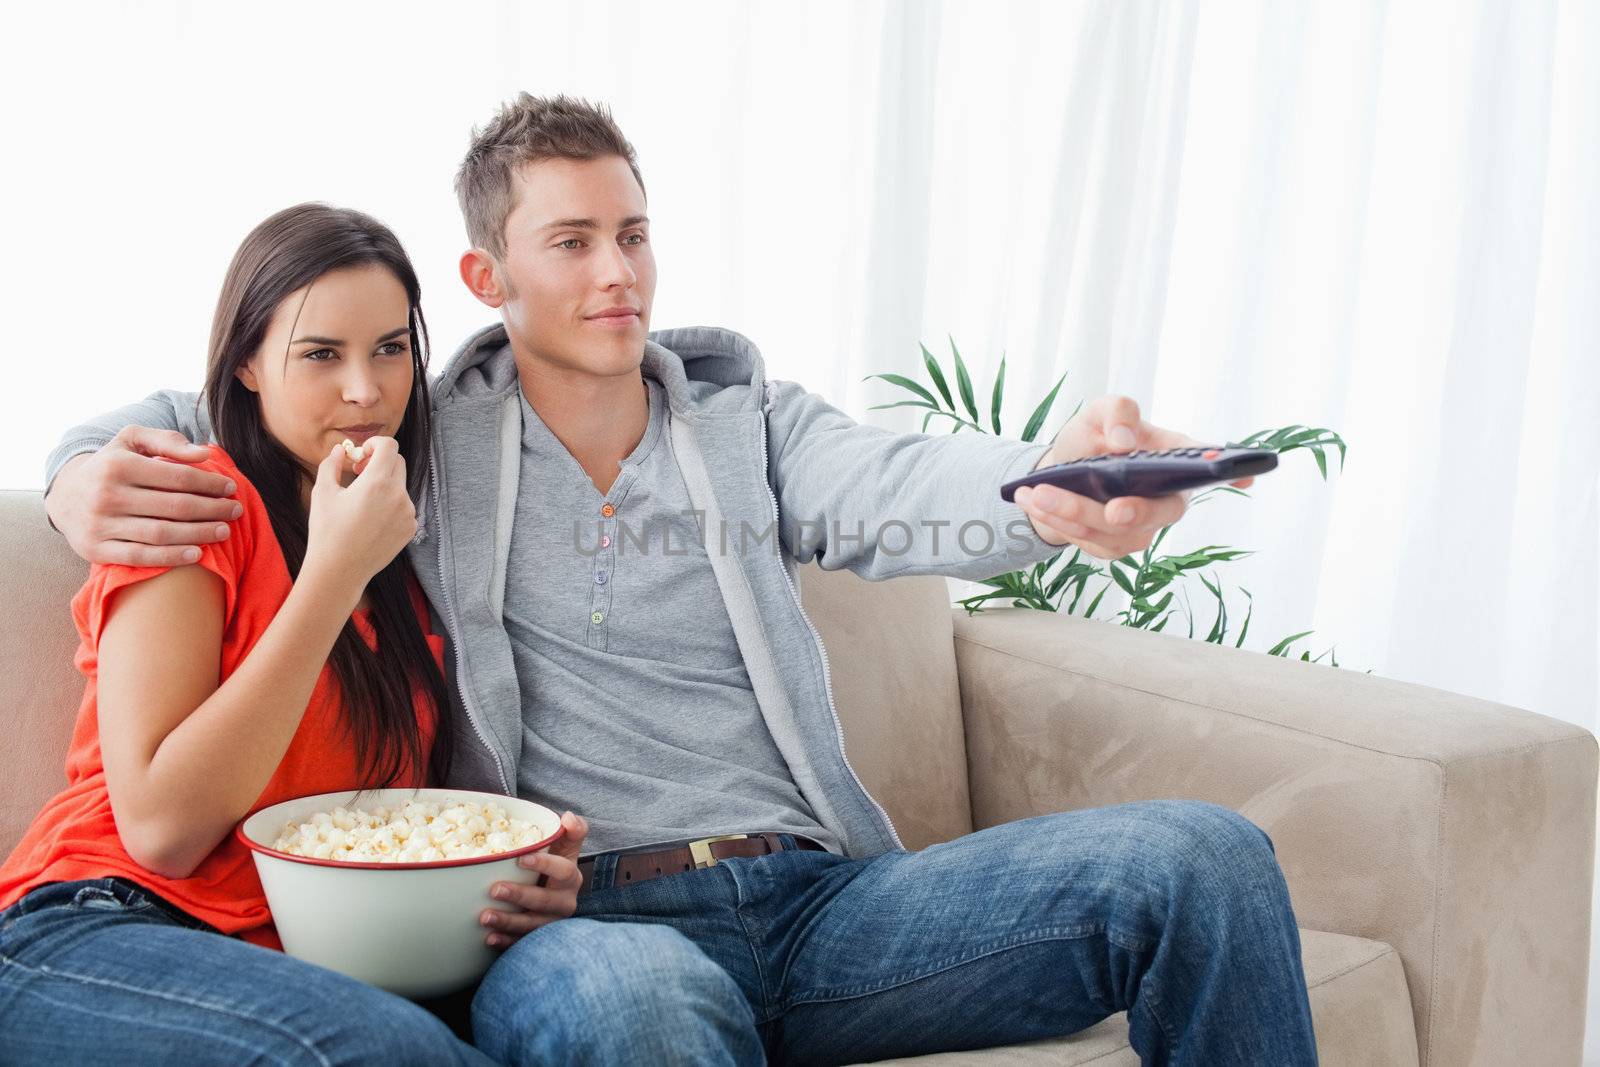 An embracing couple sitting on the couch together as they watch tv and eat popcorn